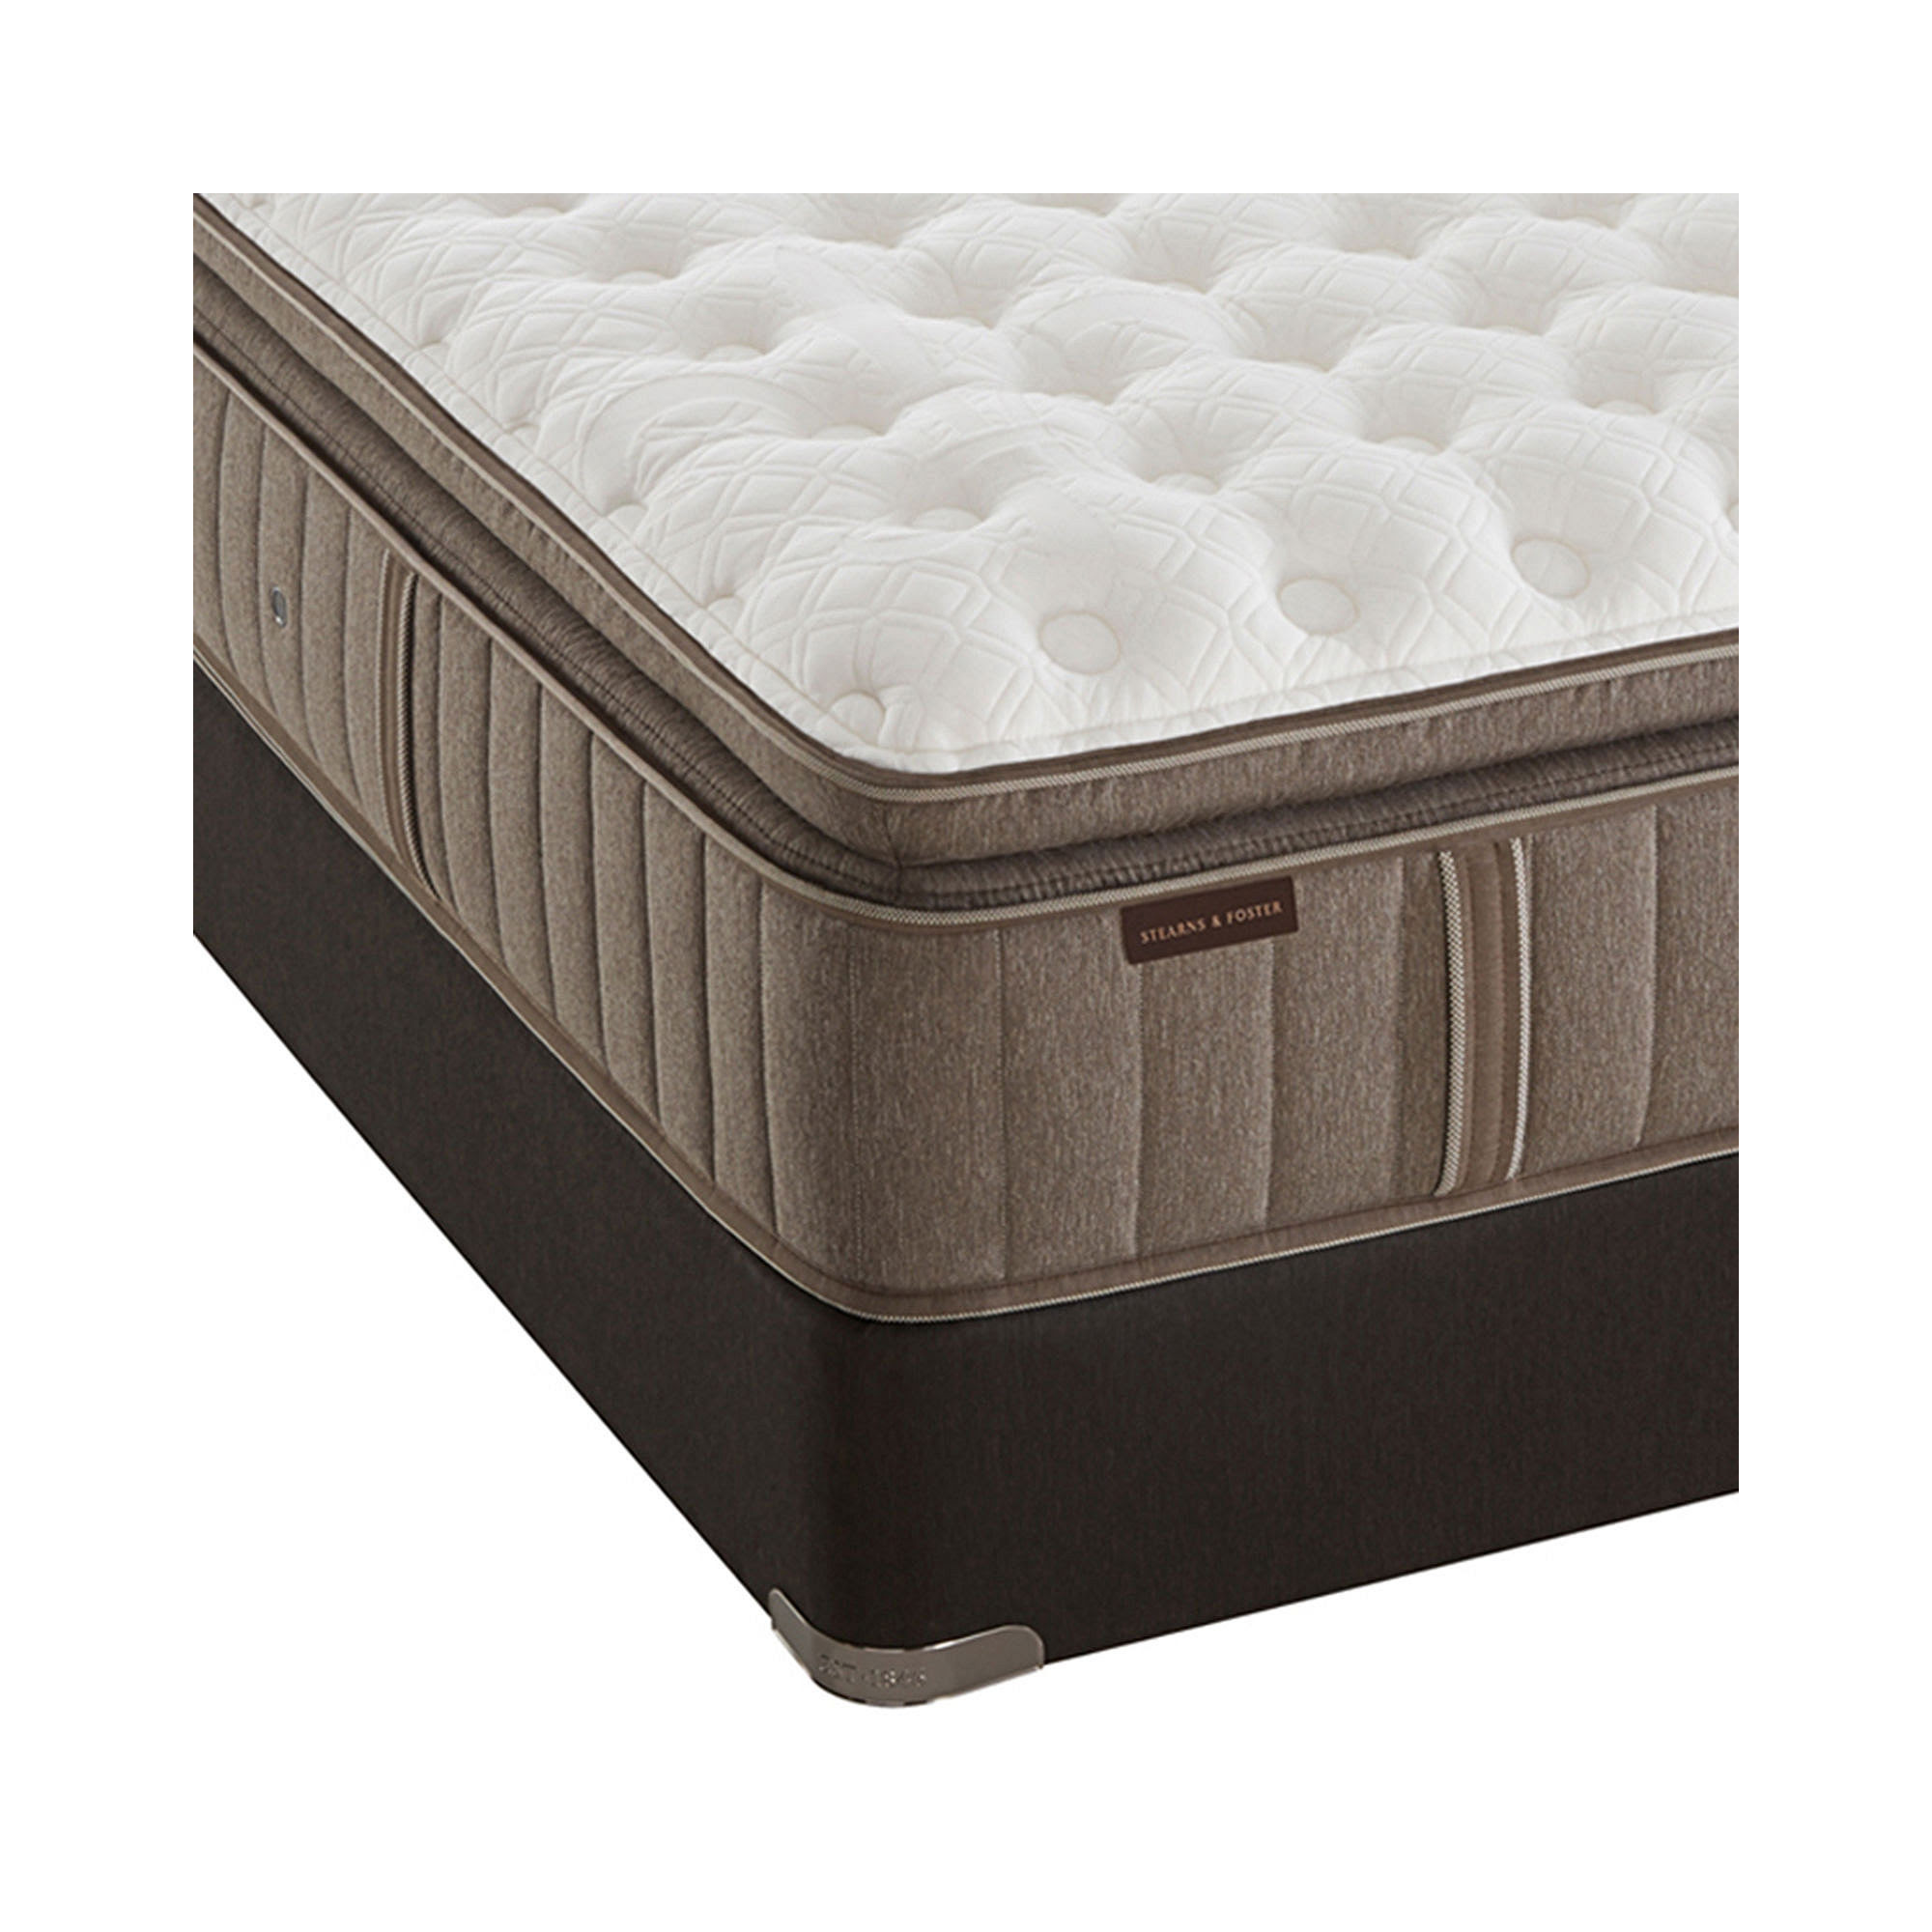 Buy Stearns and Foster Hannah Grace Luxury Plush EPT - Mattress + Box
Spring Before Too Late